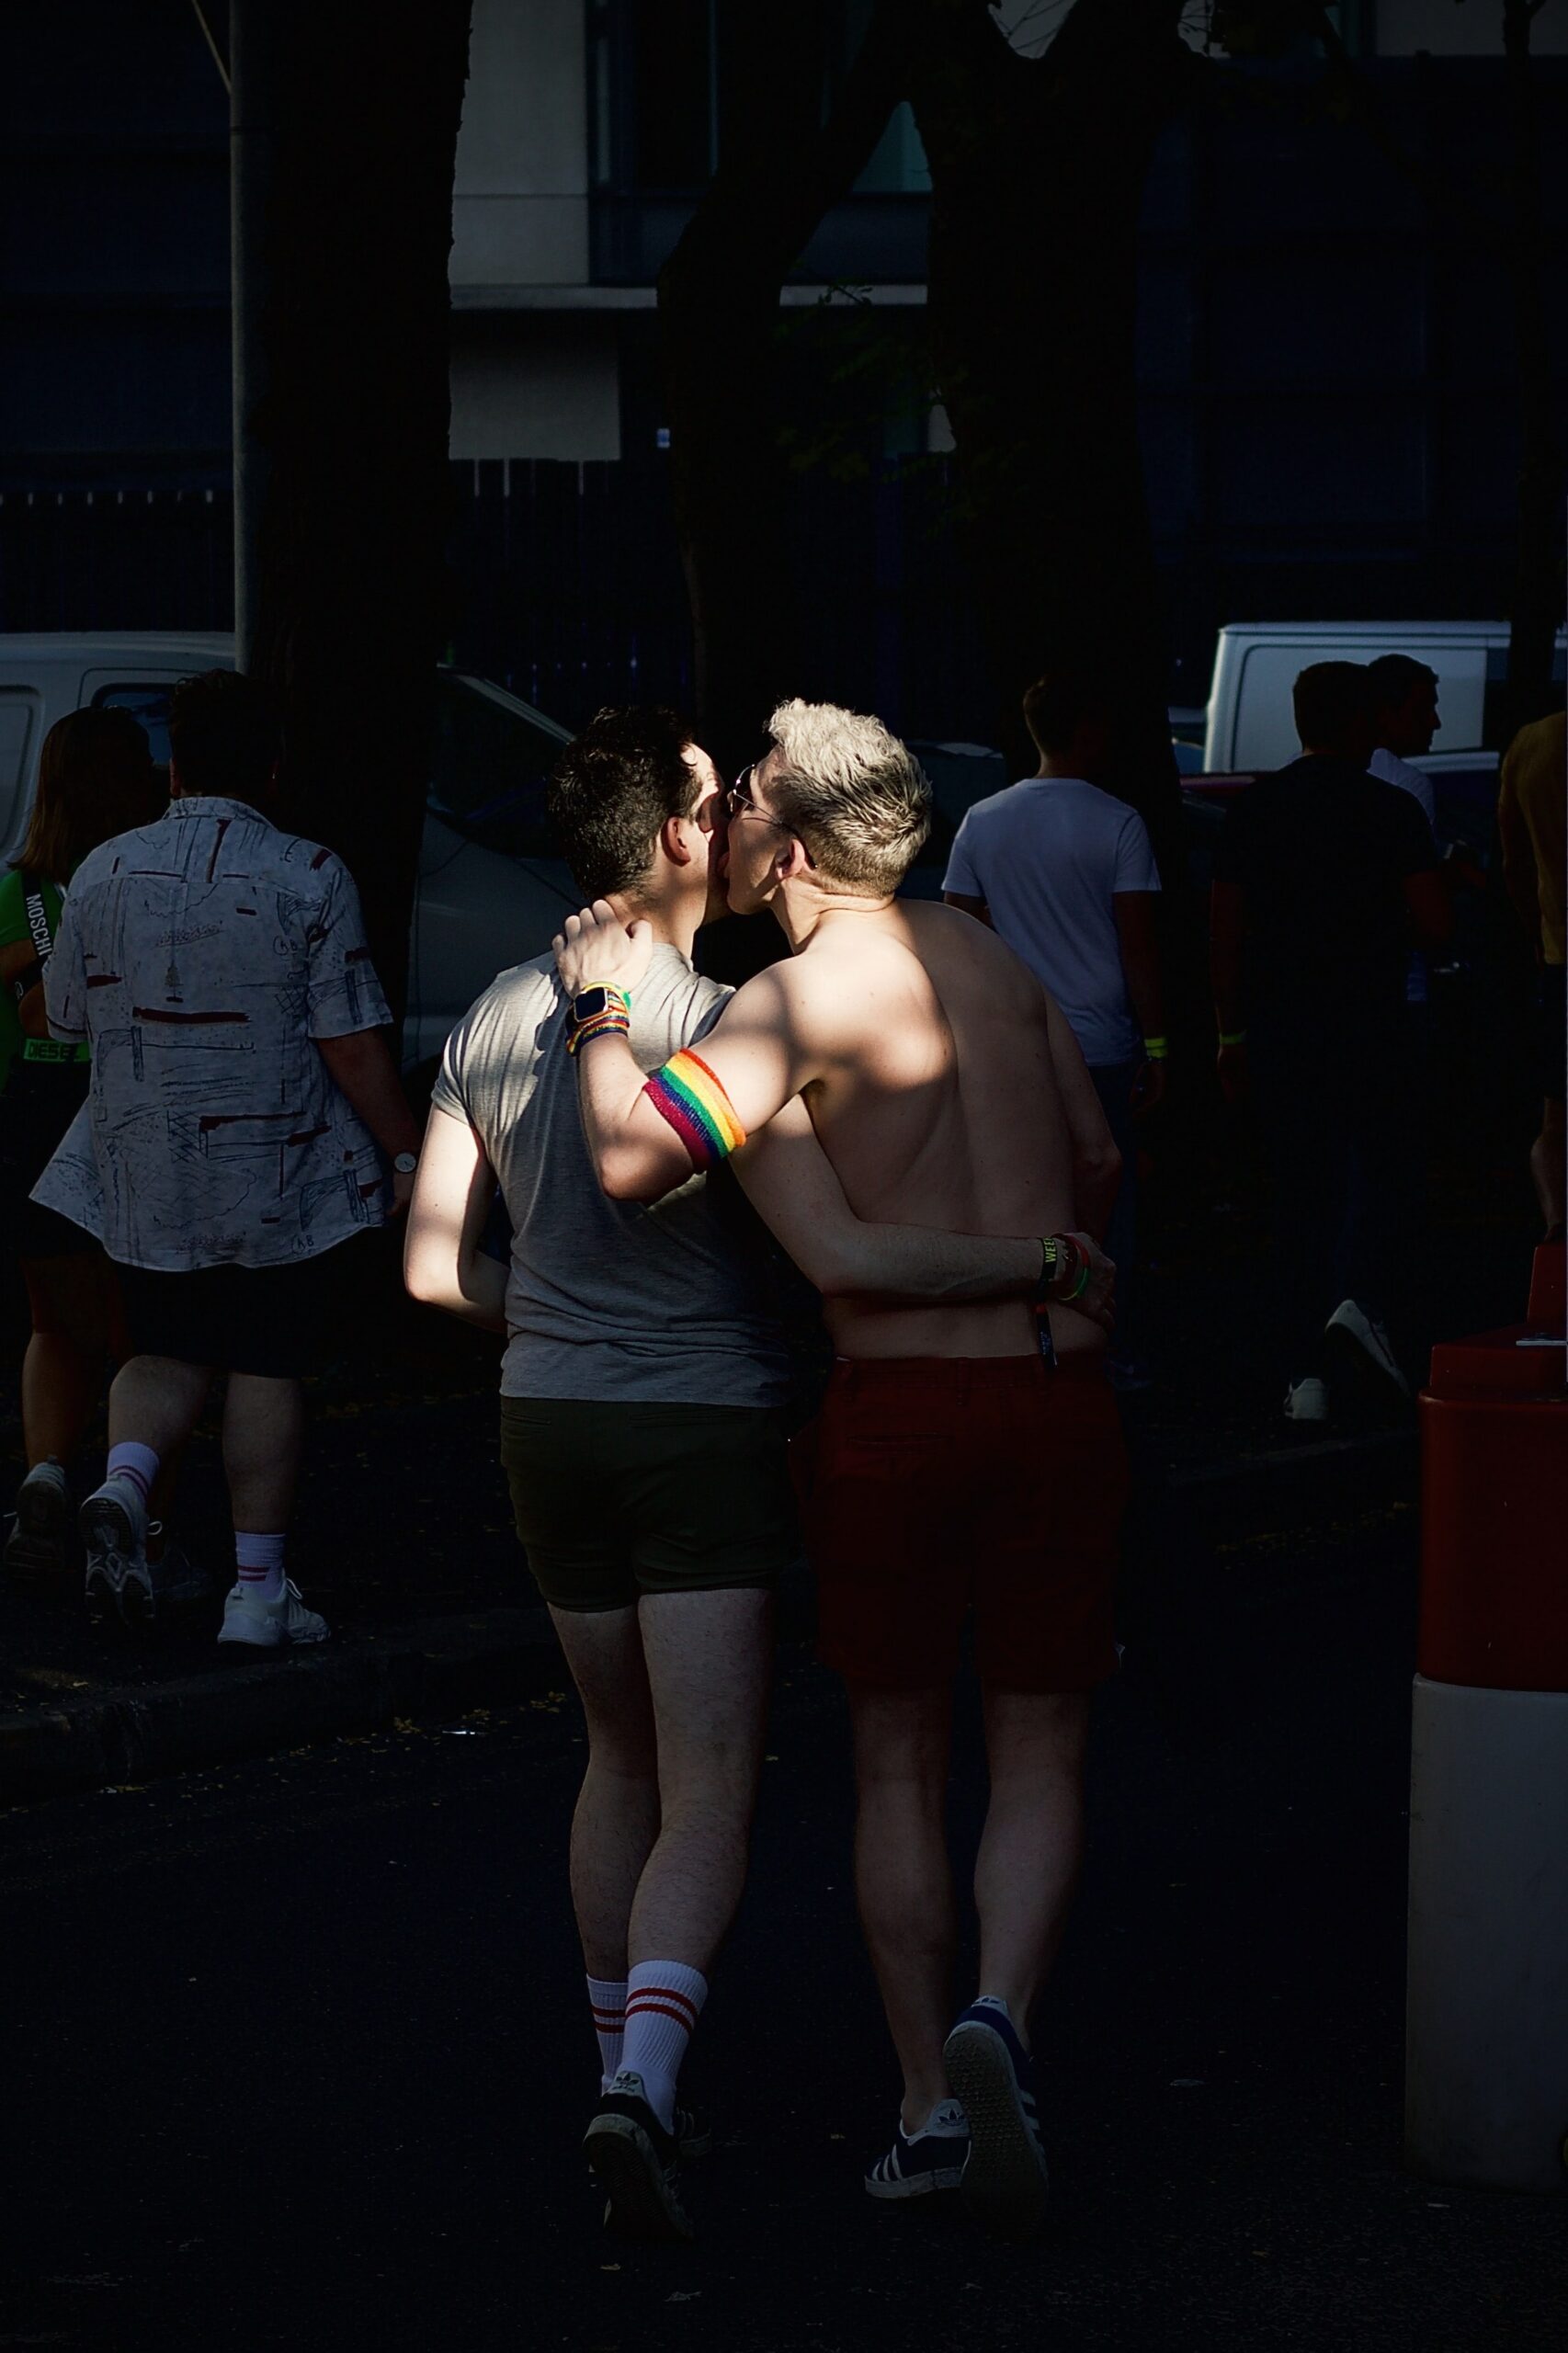 The photo shows the backs of two men, walking arm in arm, as they engage in a kiss. One man has a rainbow painted onto his arm.